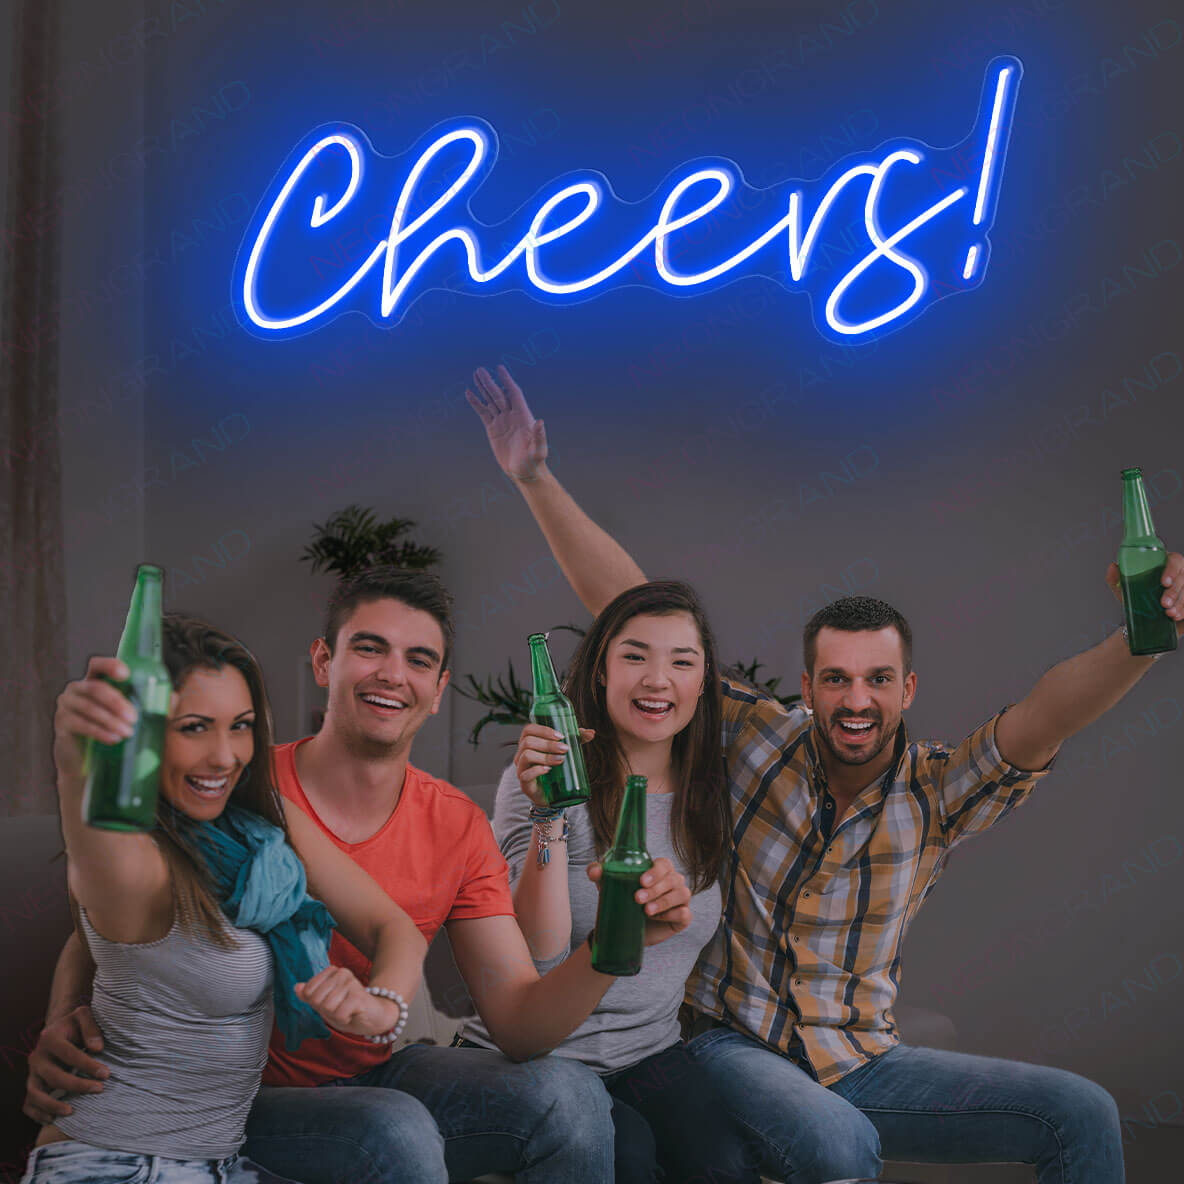 Cheers Neon Sign Led Light Up Bar Sign Blue